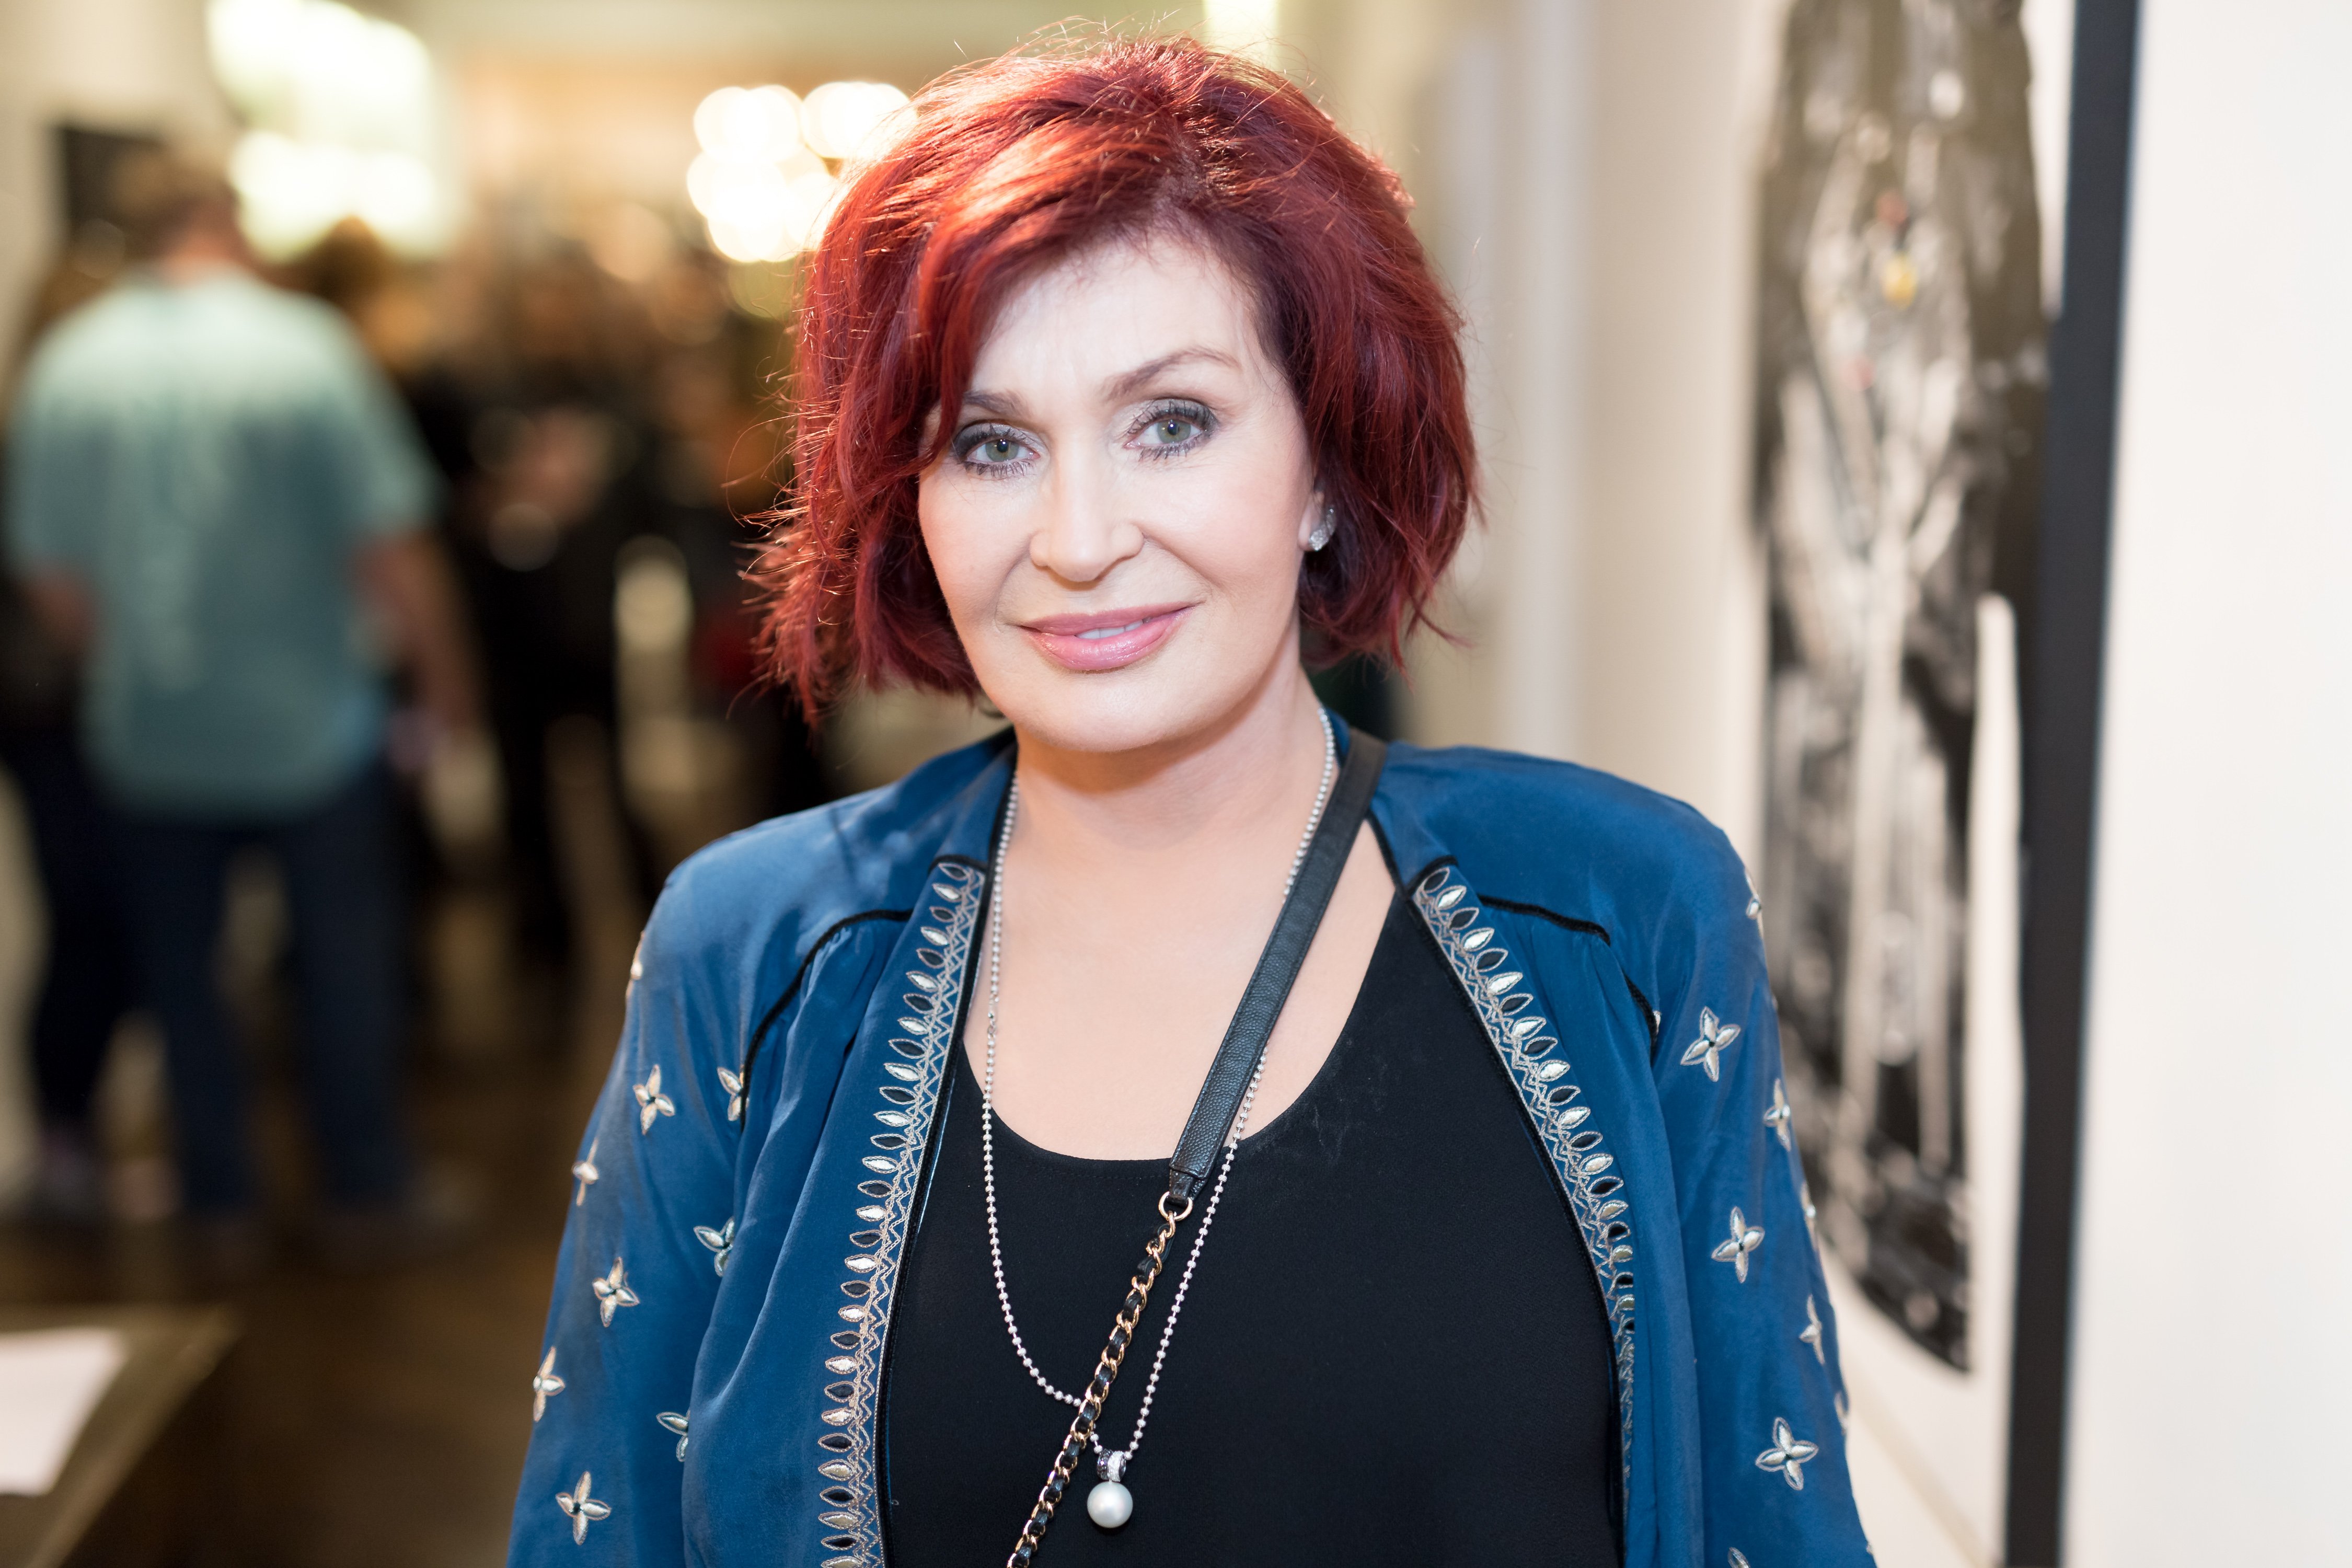 Sharon Osbourne attends the Billy Morrison - Aude Somnia Solo Exhibition on September 28, 2017. | Photo: GettyImages